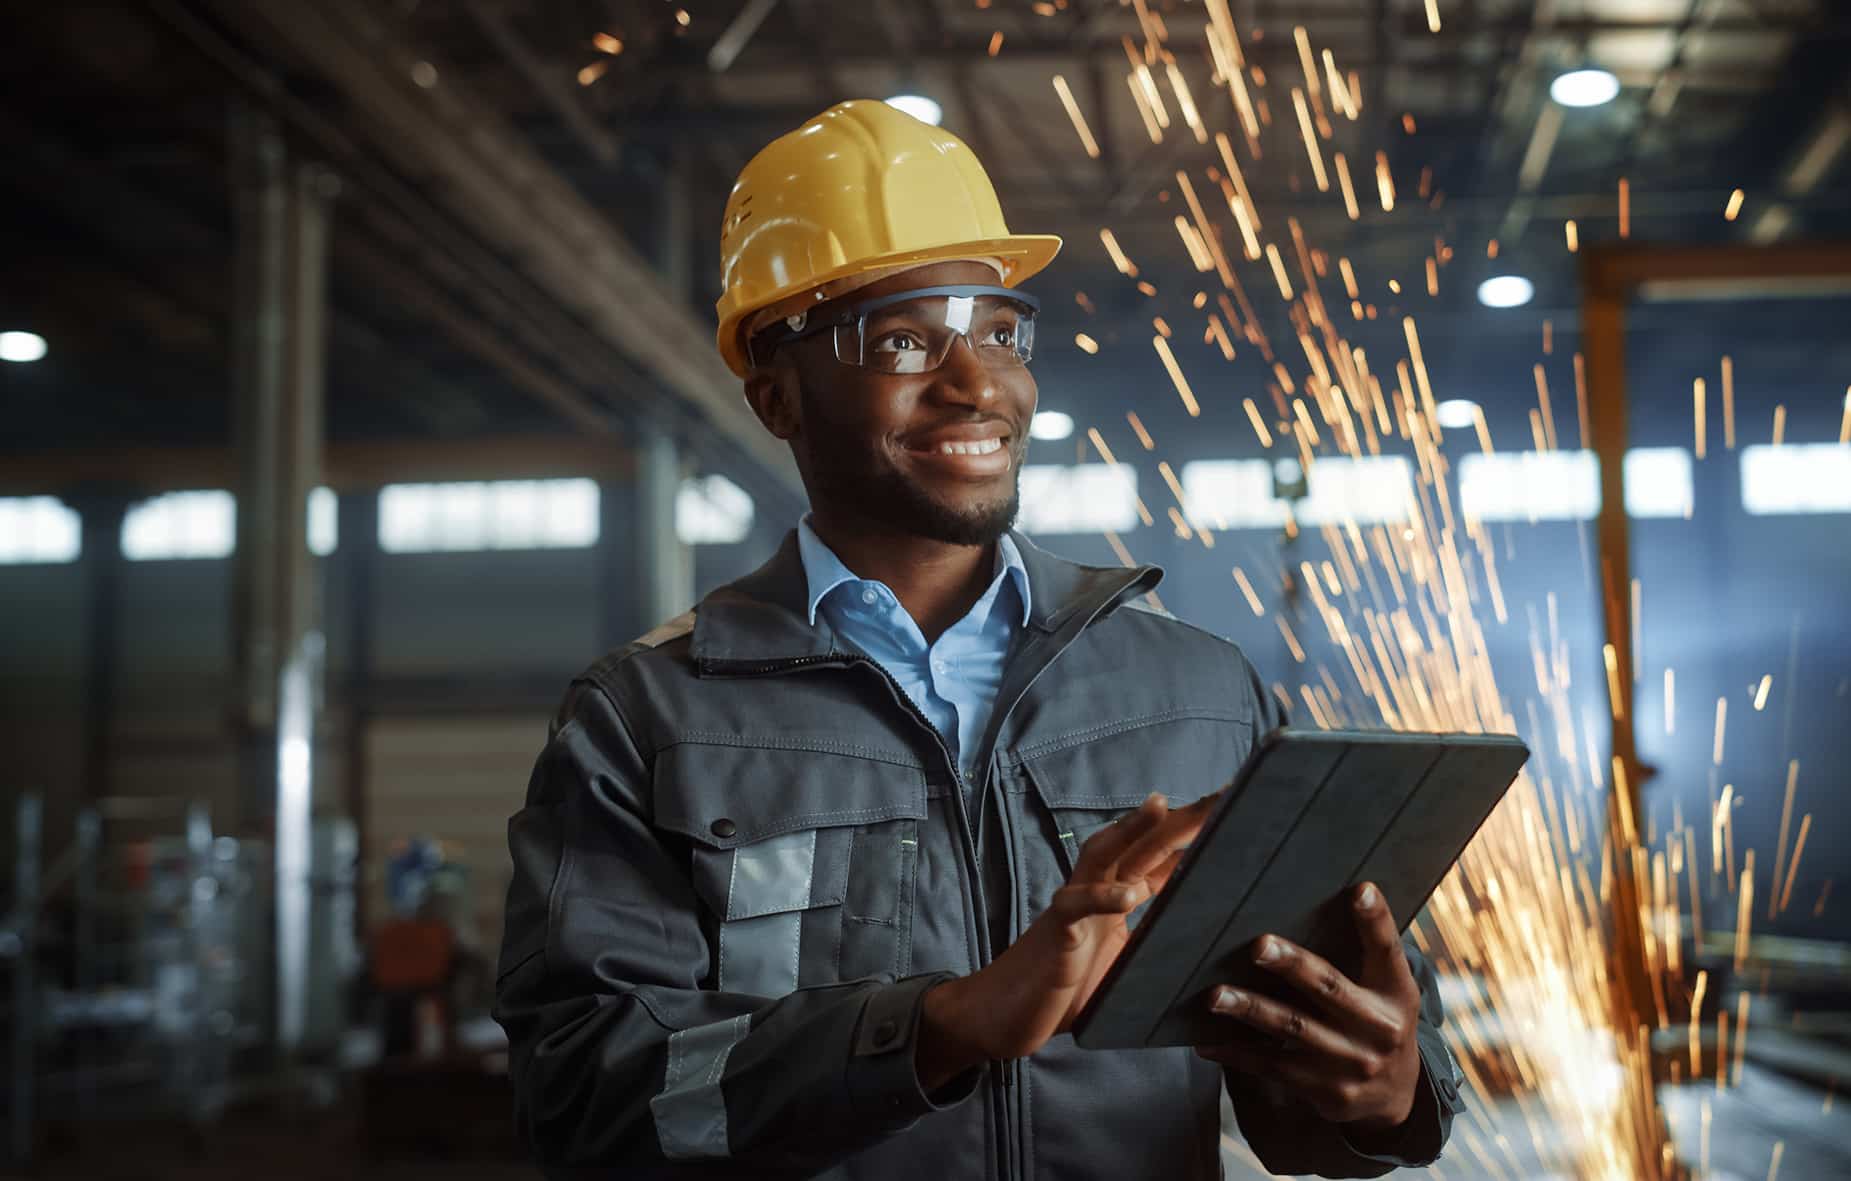 Professional Heavy Industry Engineer/Worker Wearing Safety Uniform and Hard Hat Uses Tablet Computer.